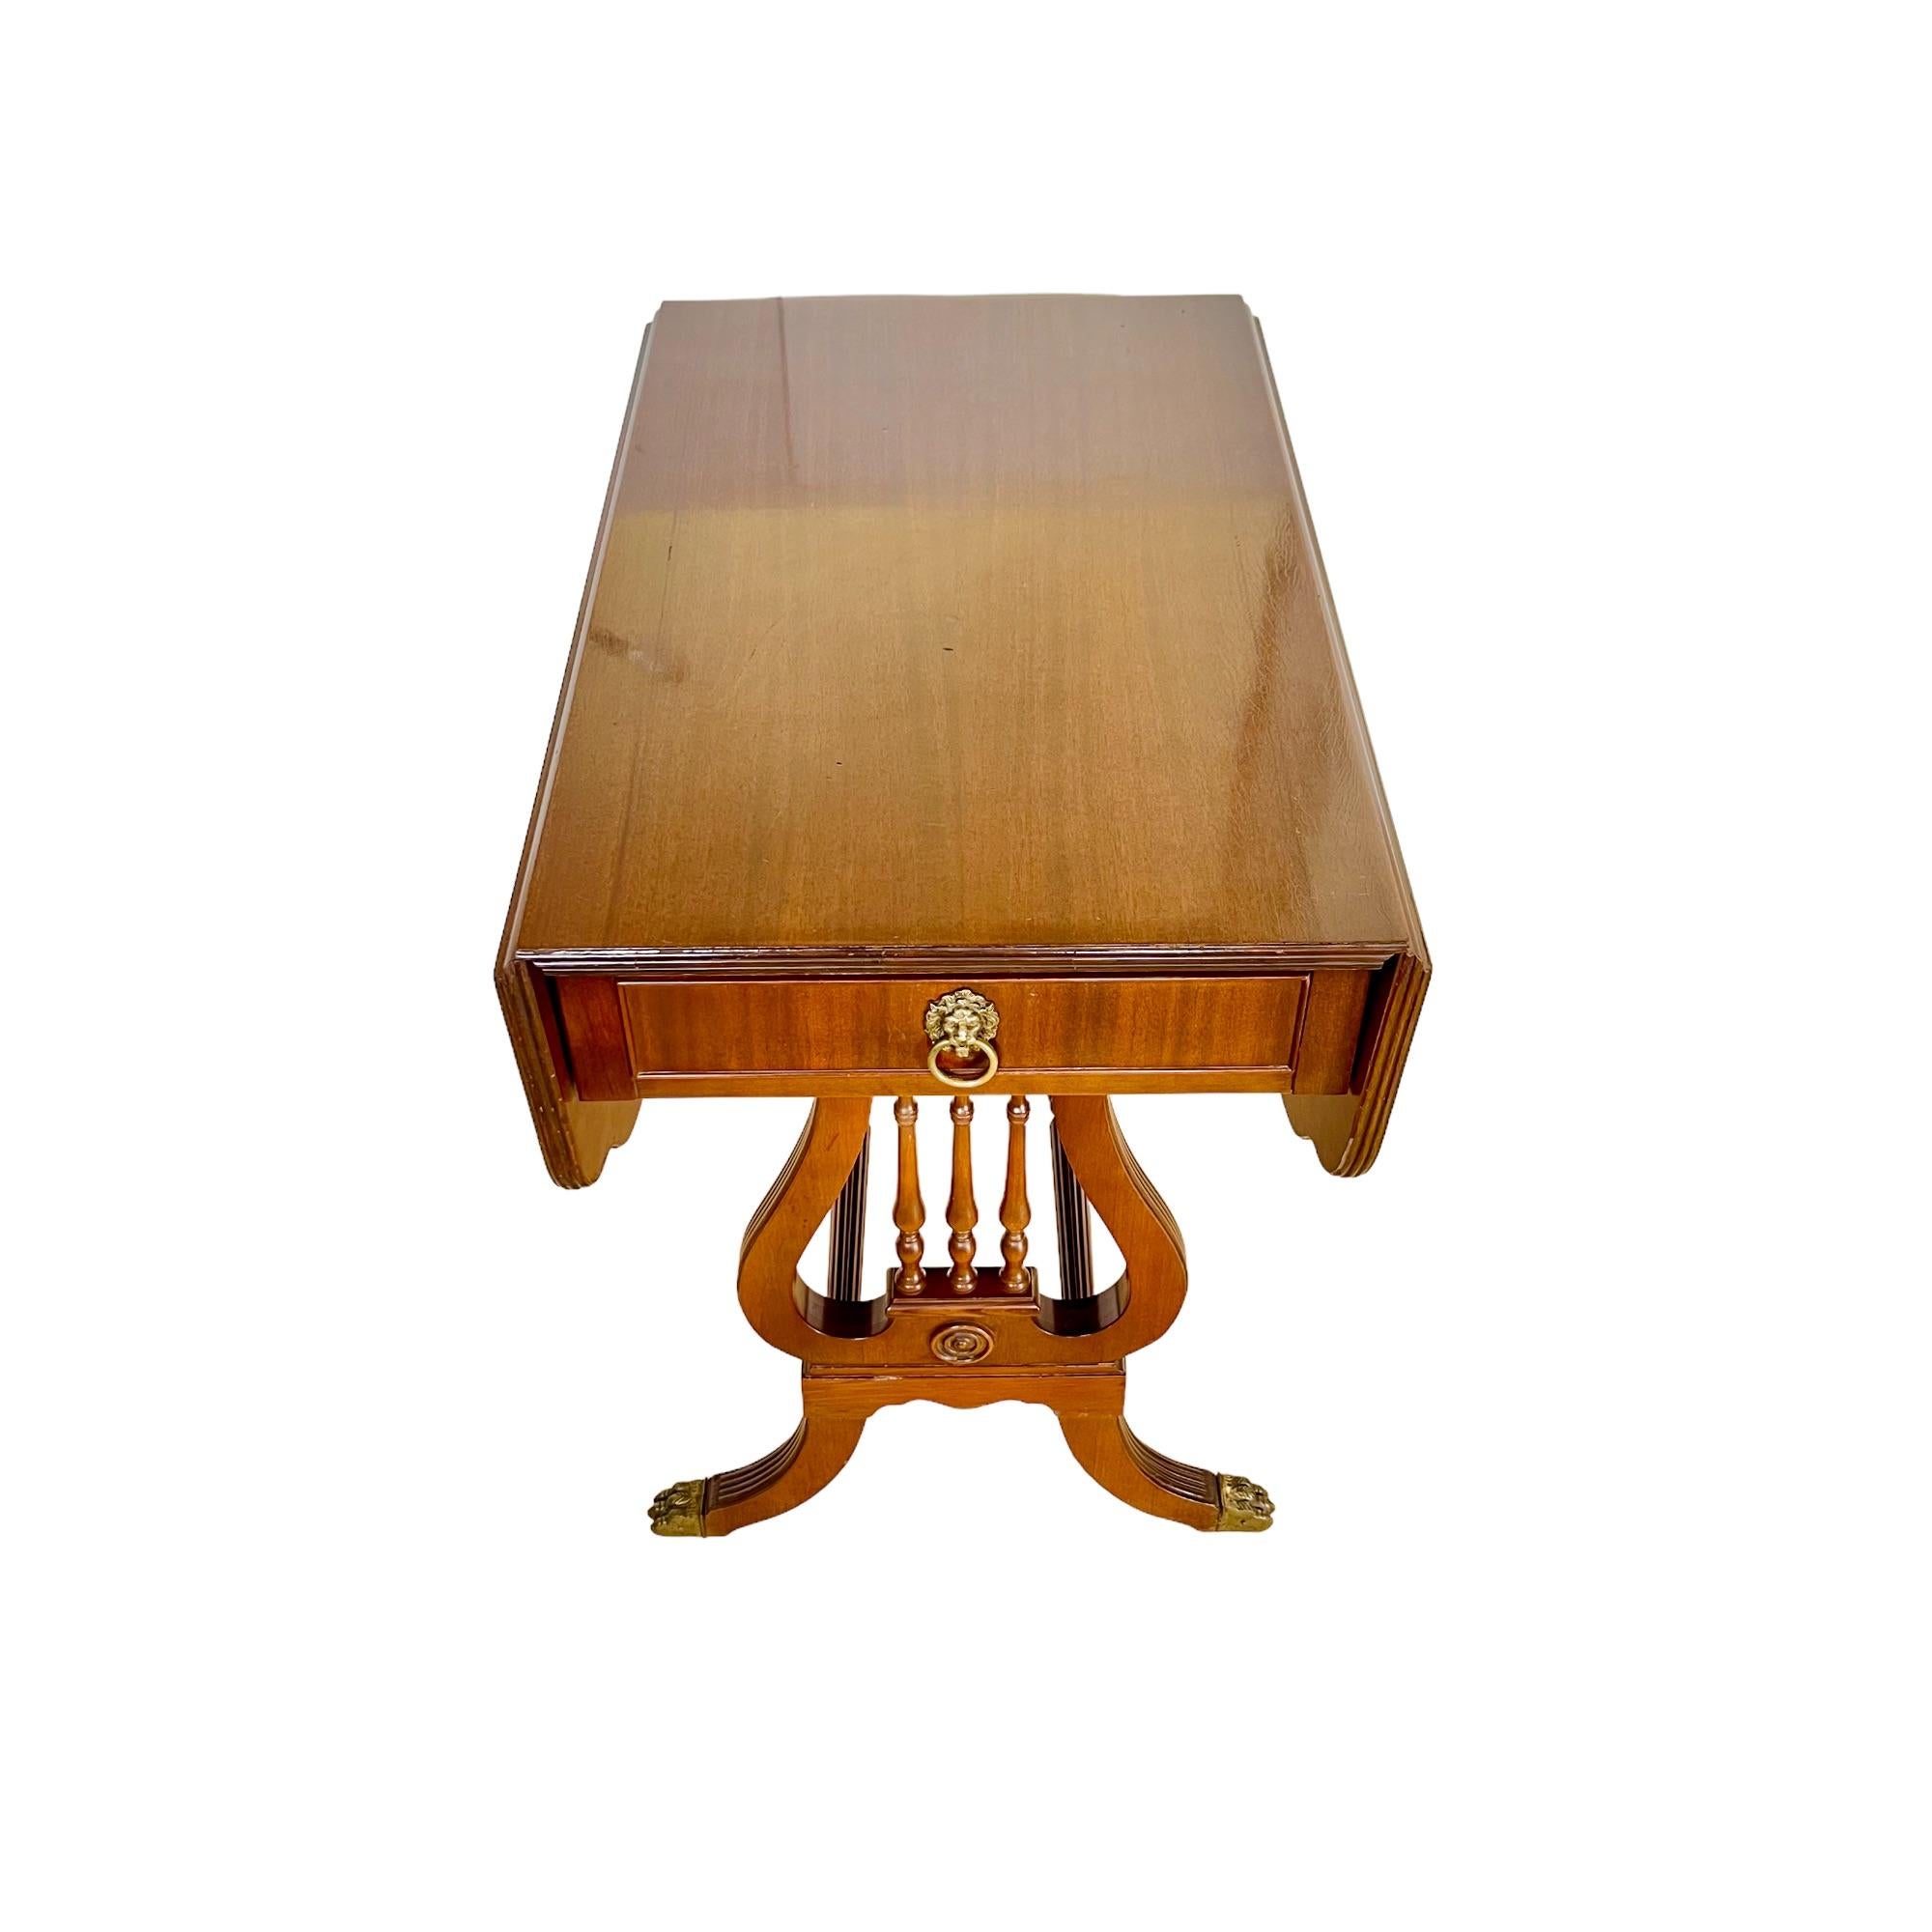 1940s Regency Mahogany Drop-Leaf Lyre Table In Good Condition For Sale In Harlingen, TX